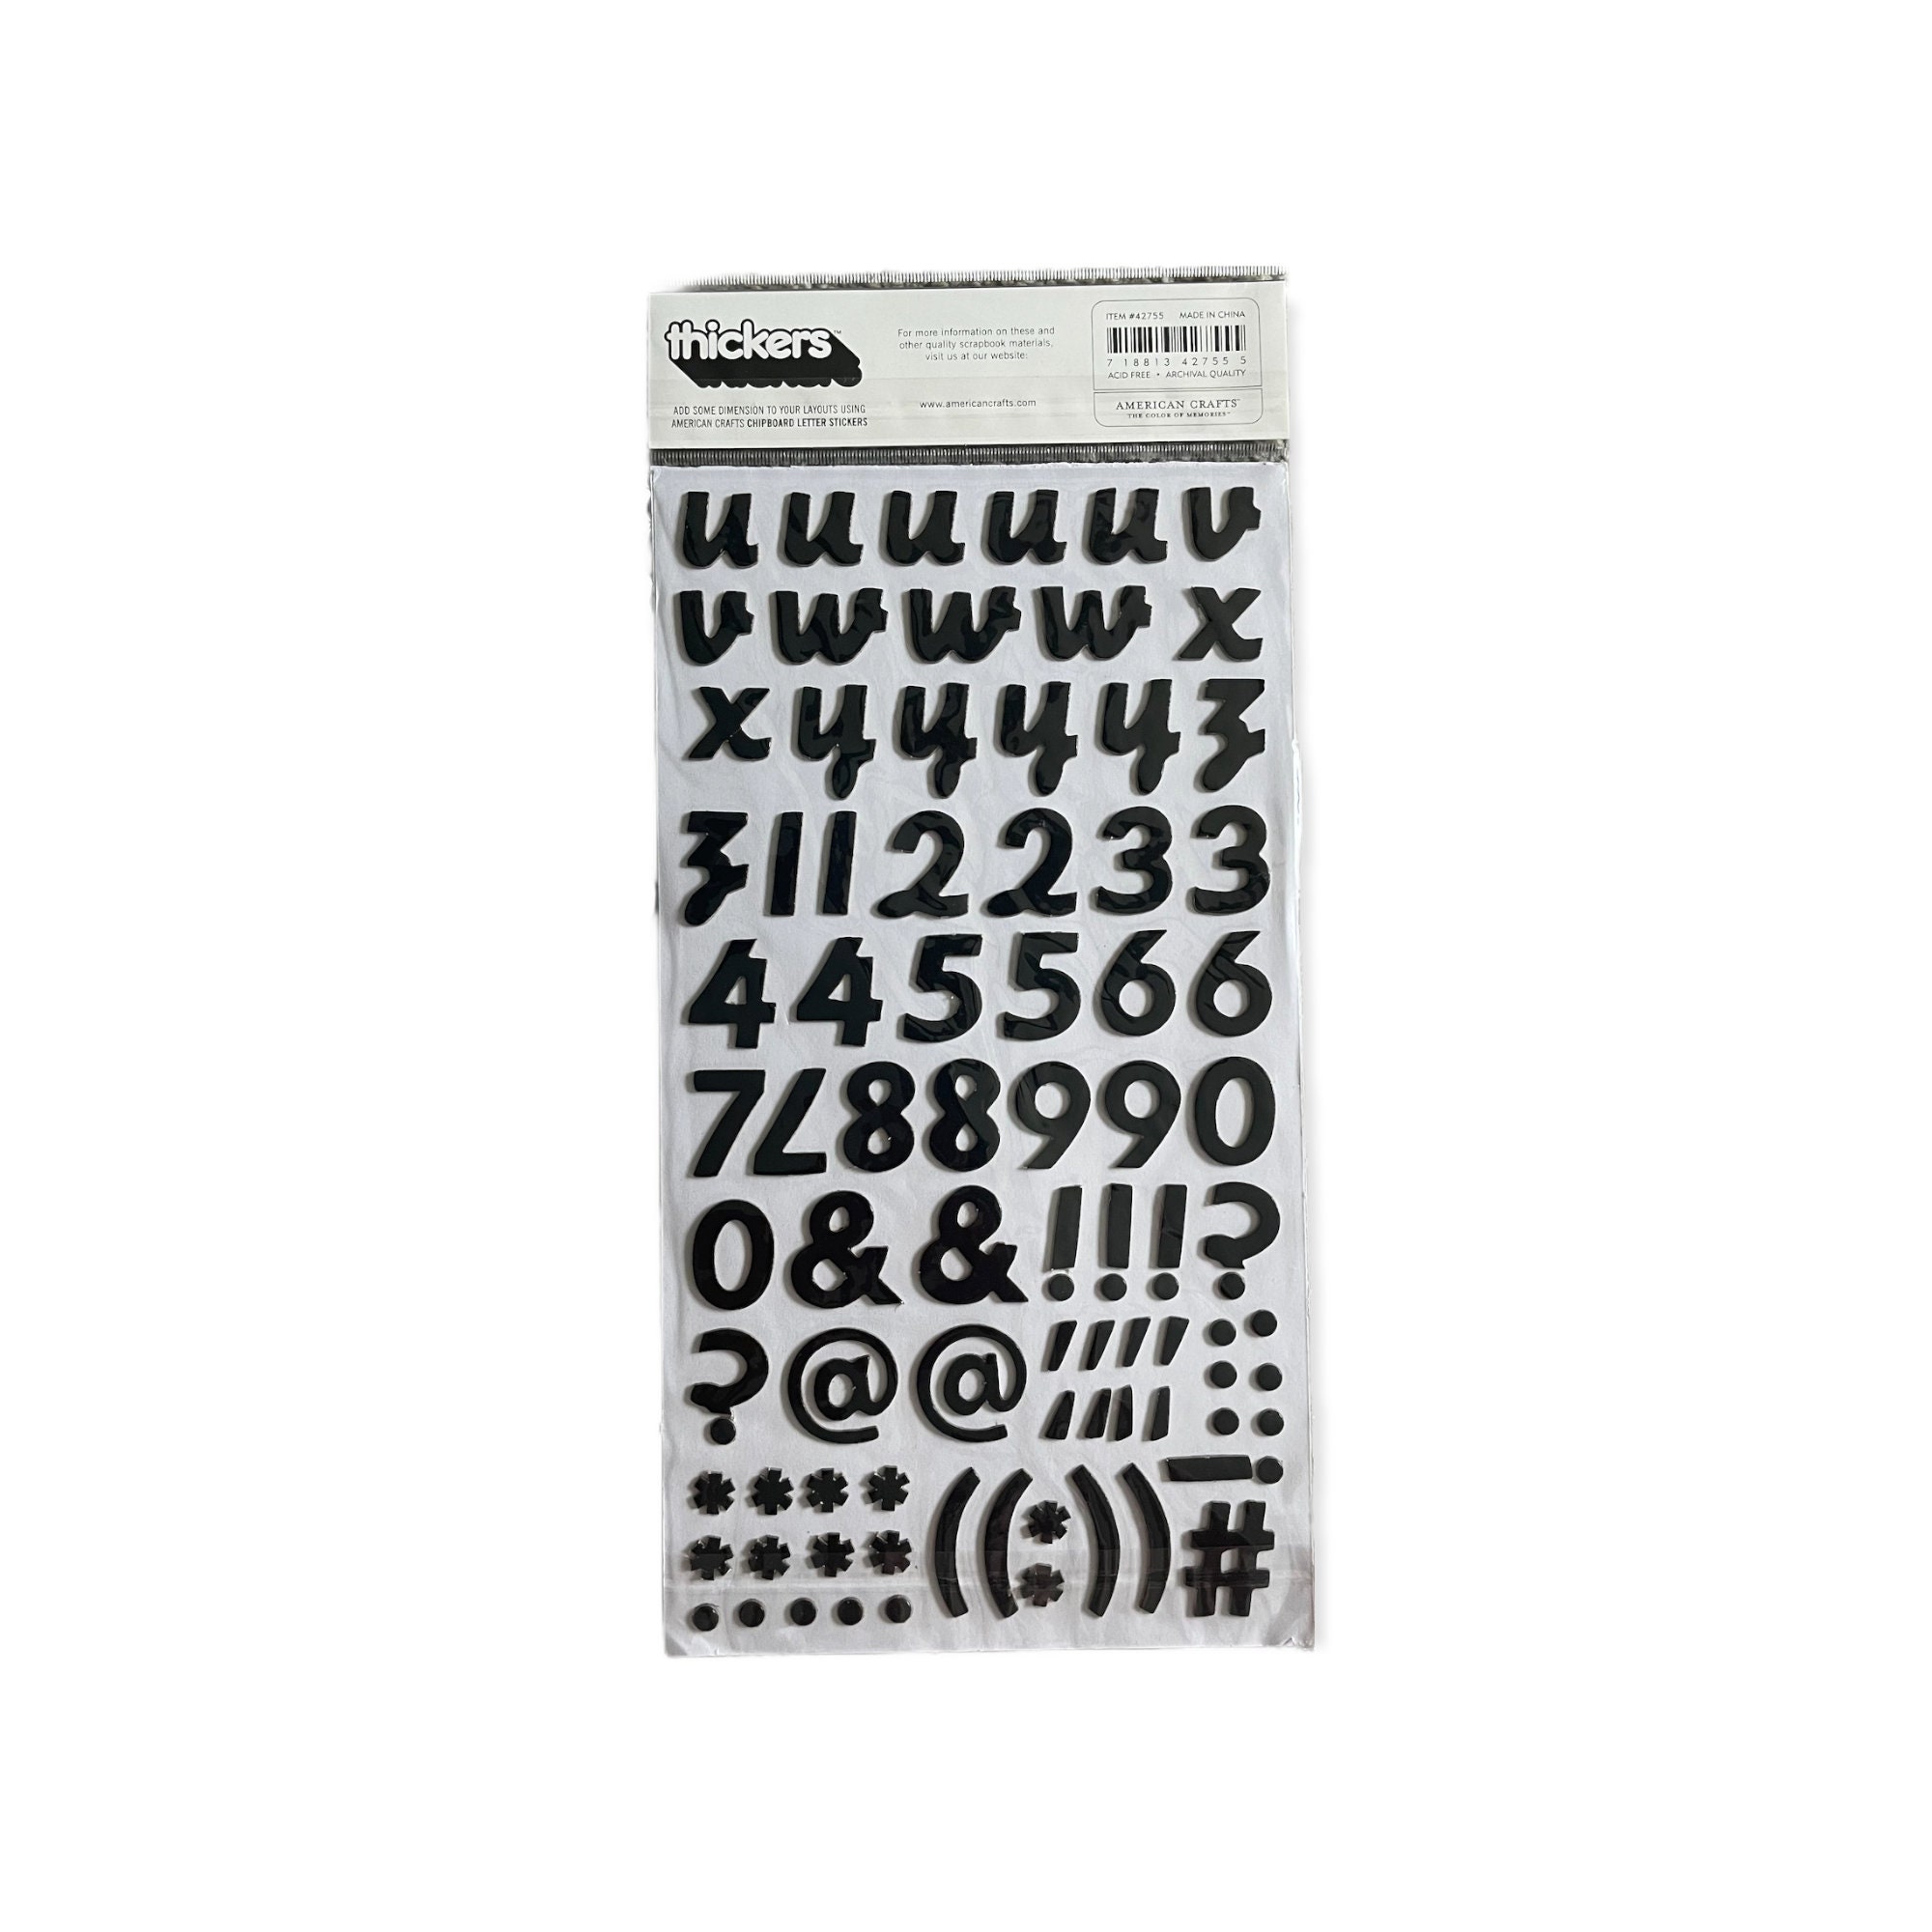 Self-adhesive Number Stickers Small Number Stickers Labels